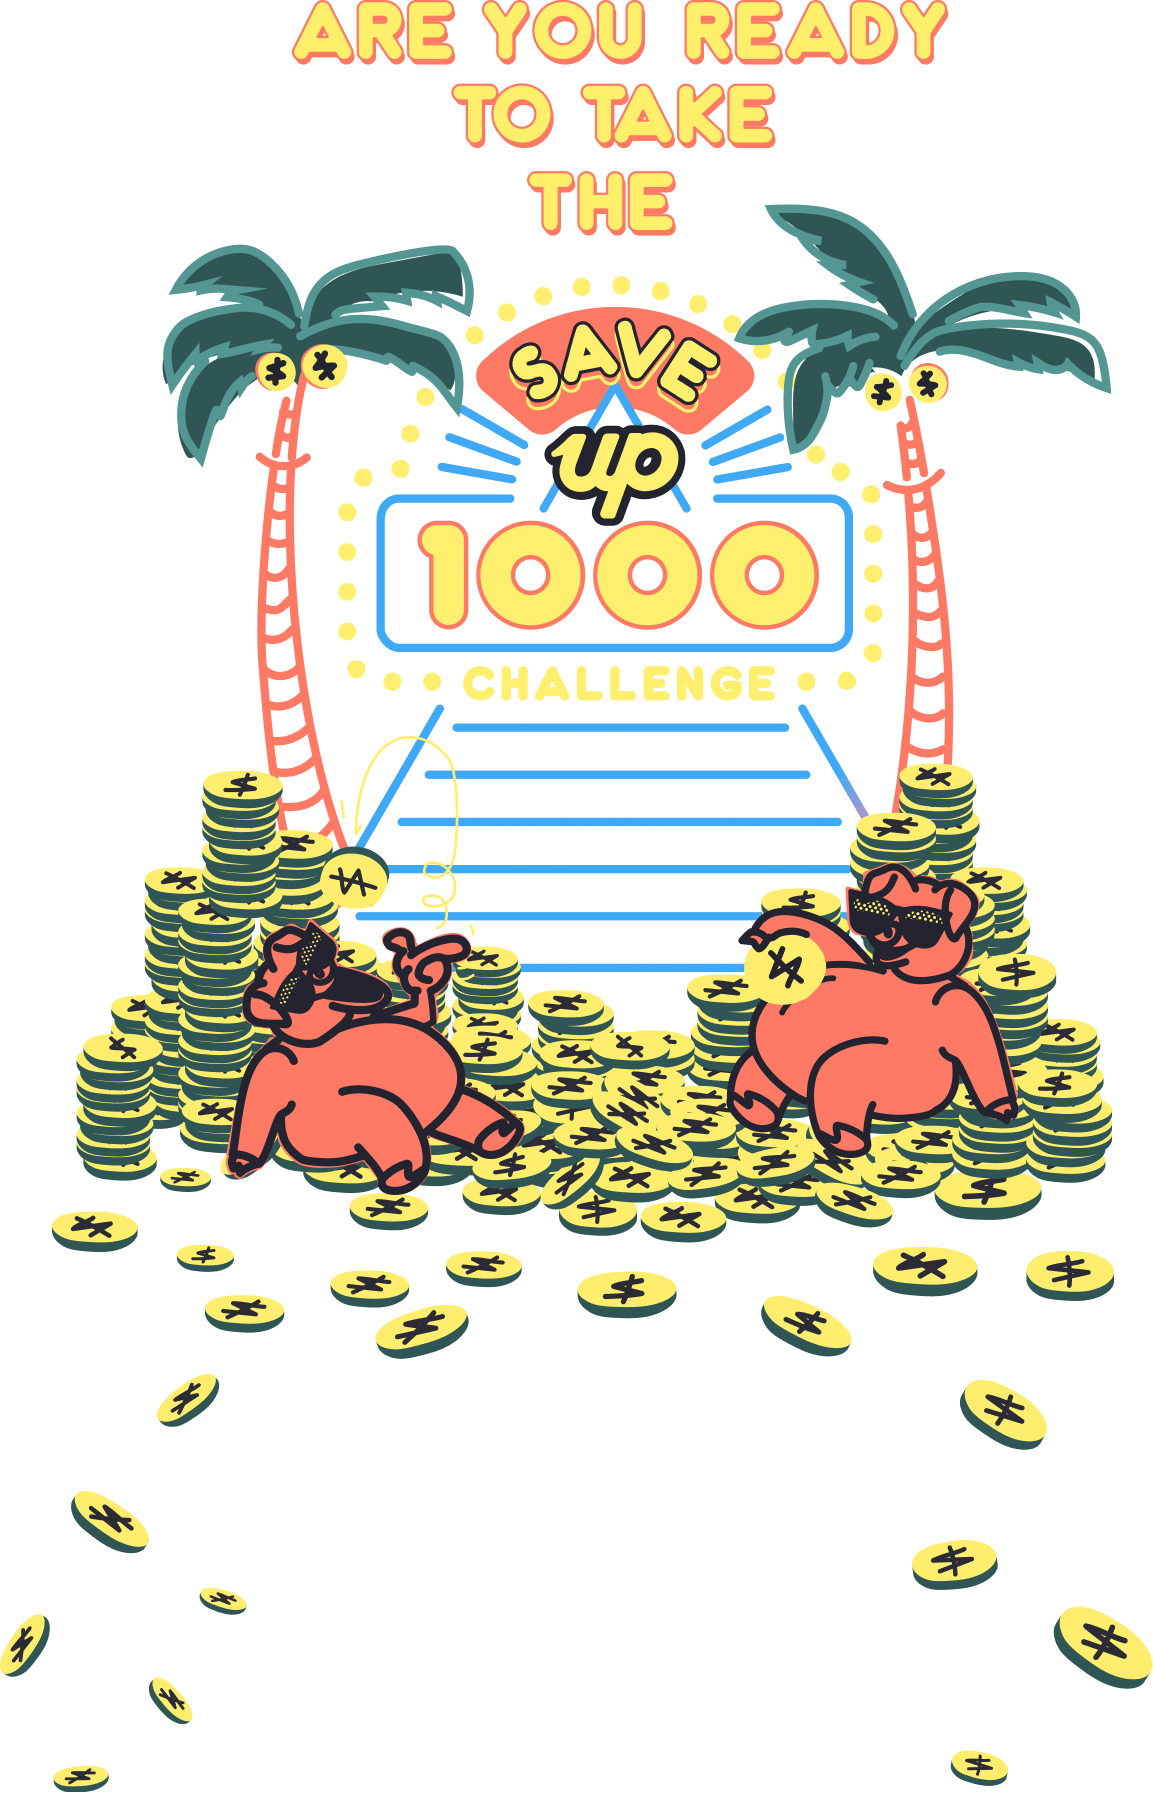 Are you ready to take the Save Up 1000 challenge?